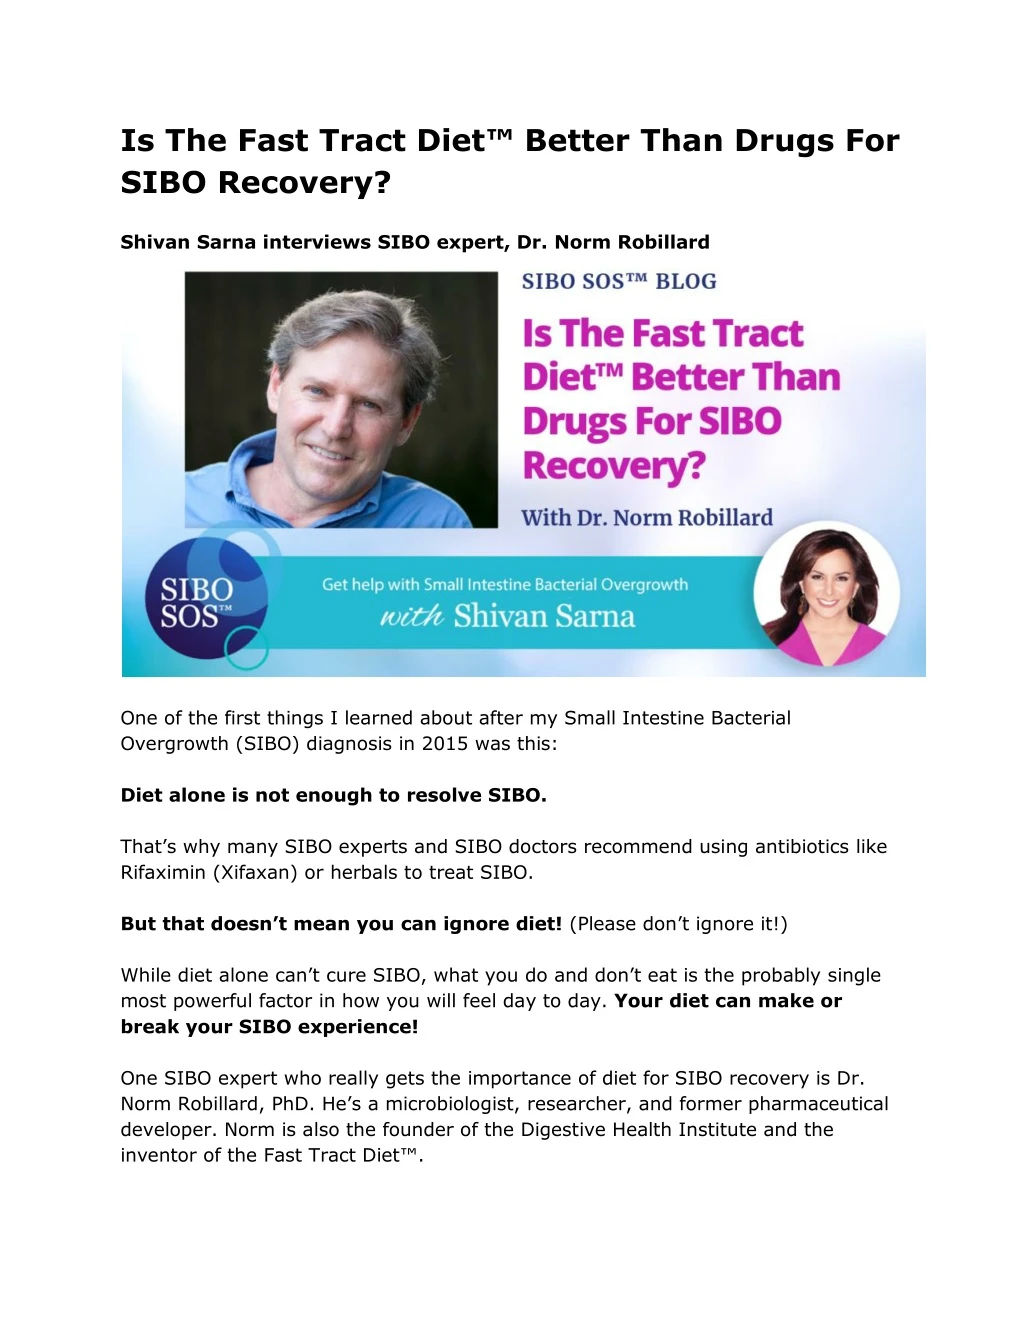 is the fast tract diet better than drugs for sibo